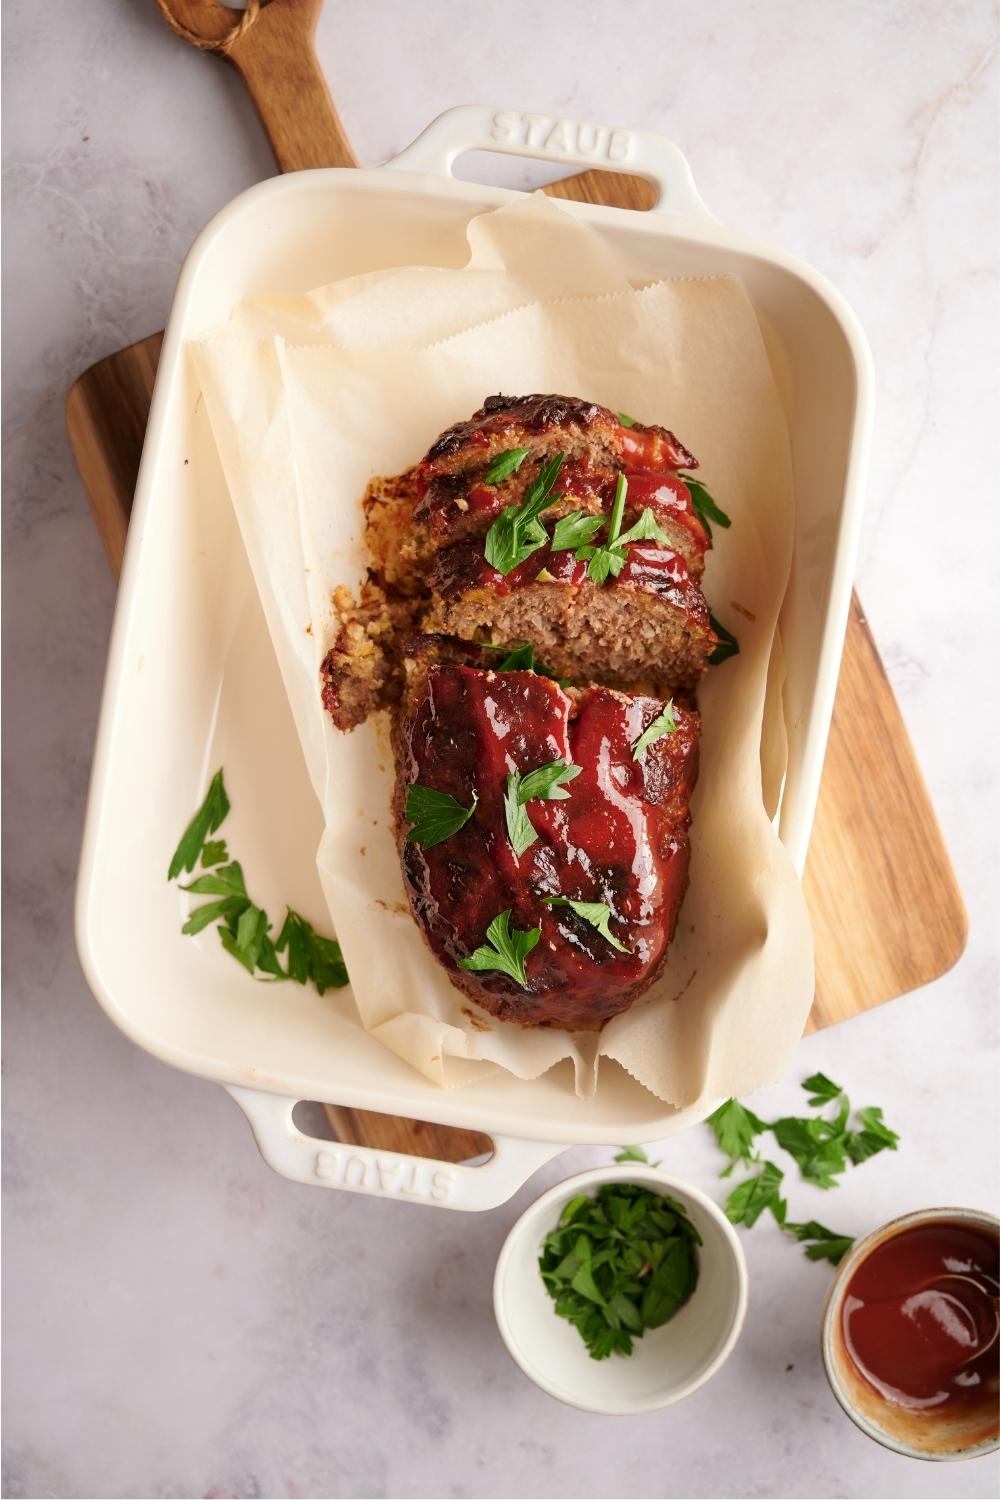 Southern meatloaf on parchment paper in a white baking dish. The dish is resting on a wood cutting board. Half of the meatloaf has been sliced to serve and the meatloaf is garnished with fresh parsley. Half-empty bowls of parsley and ketchup lay next to the meatloaf.